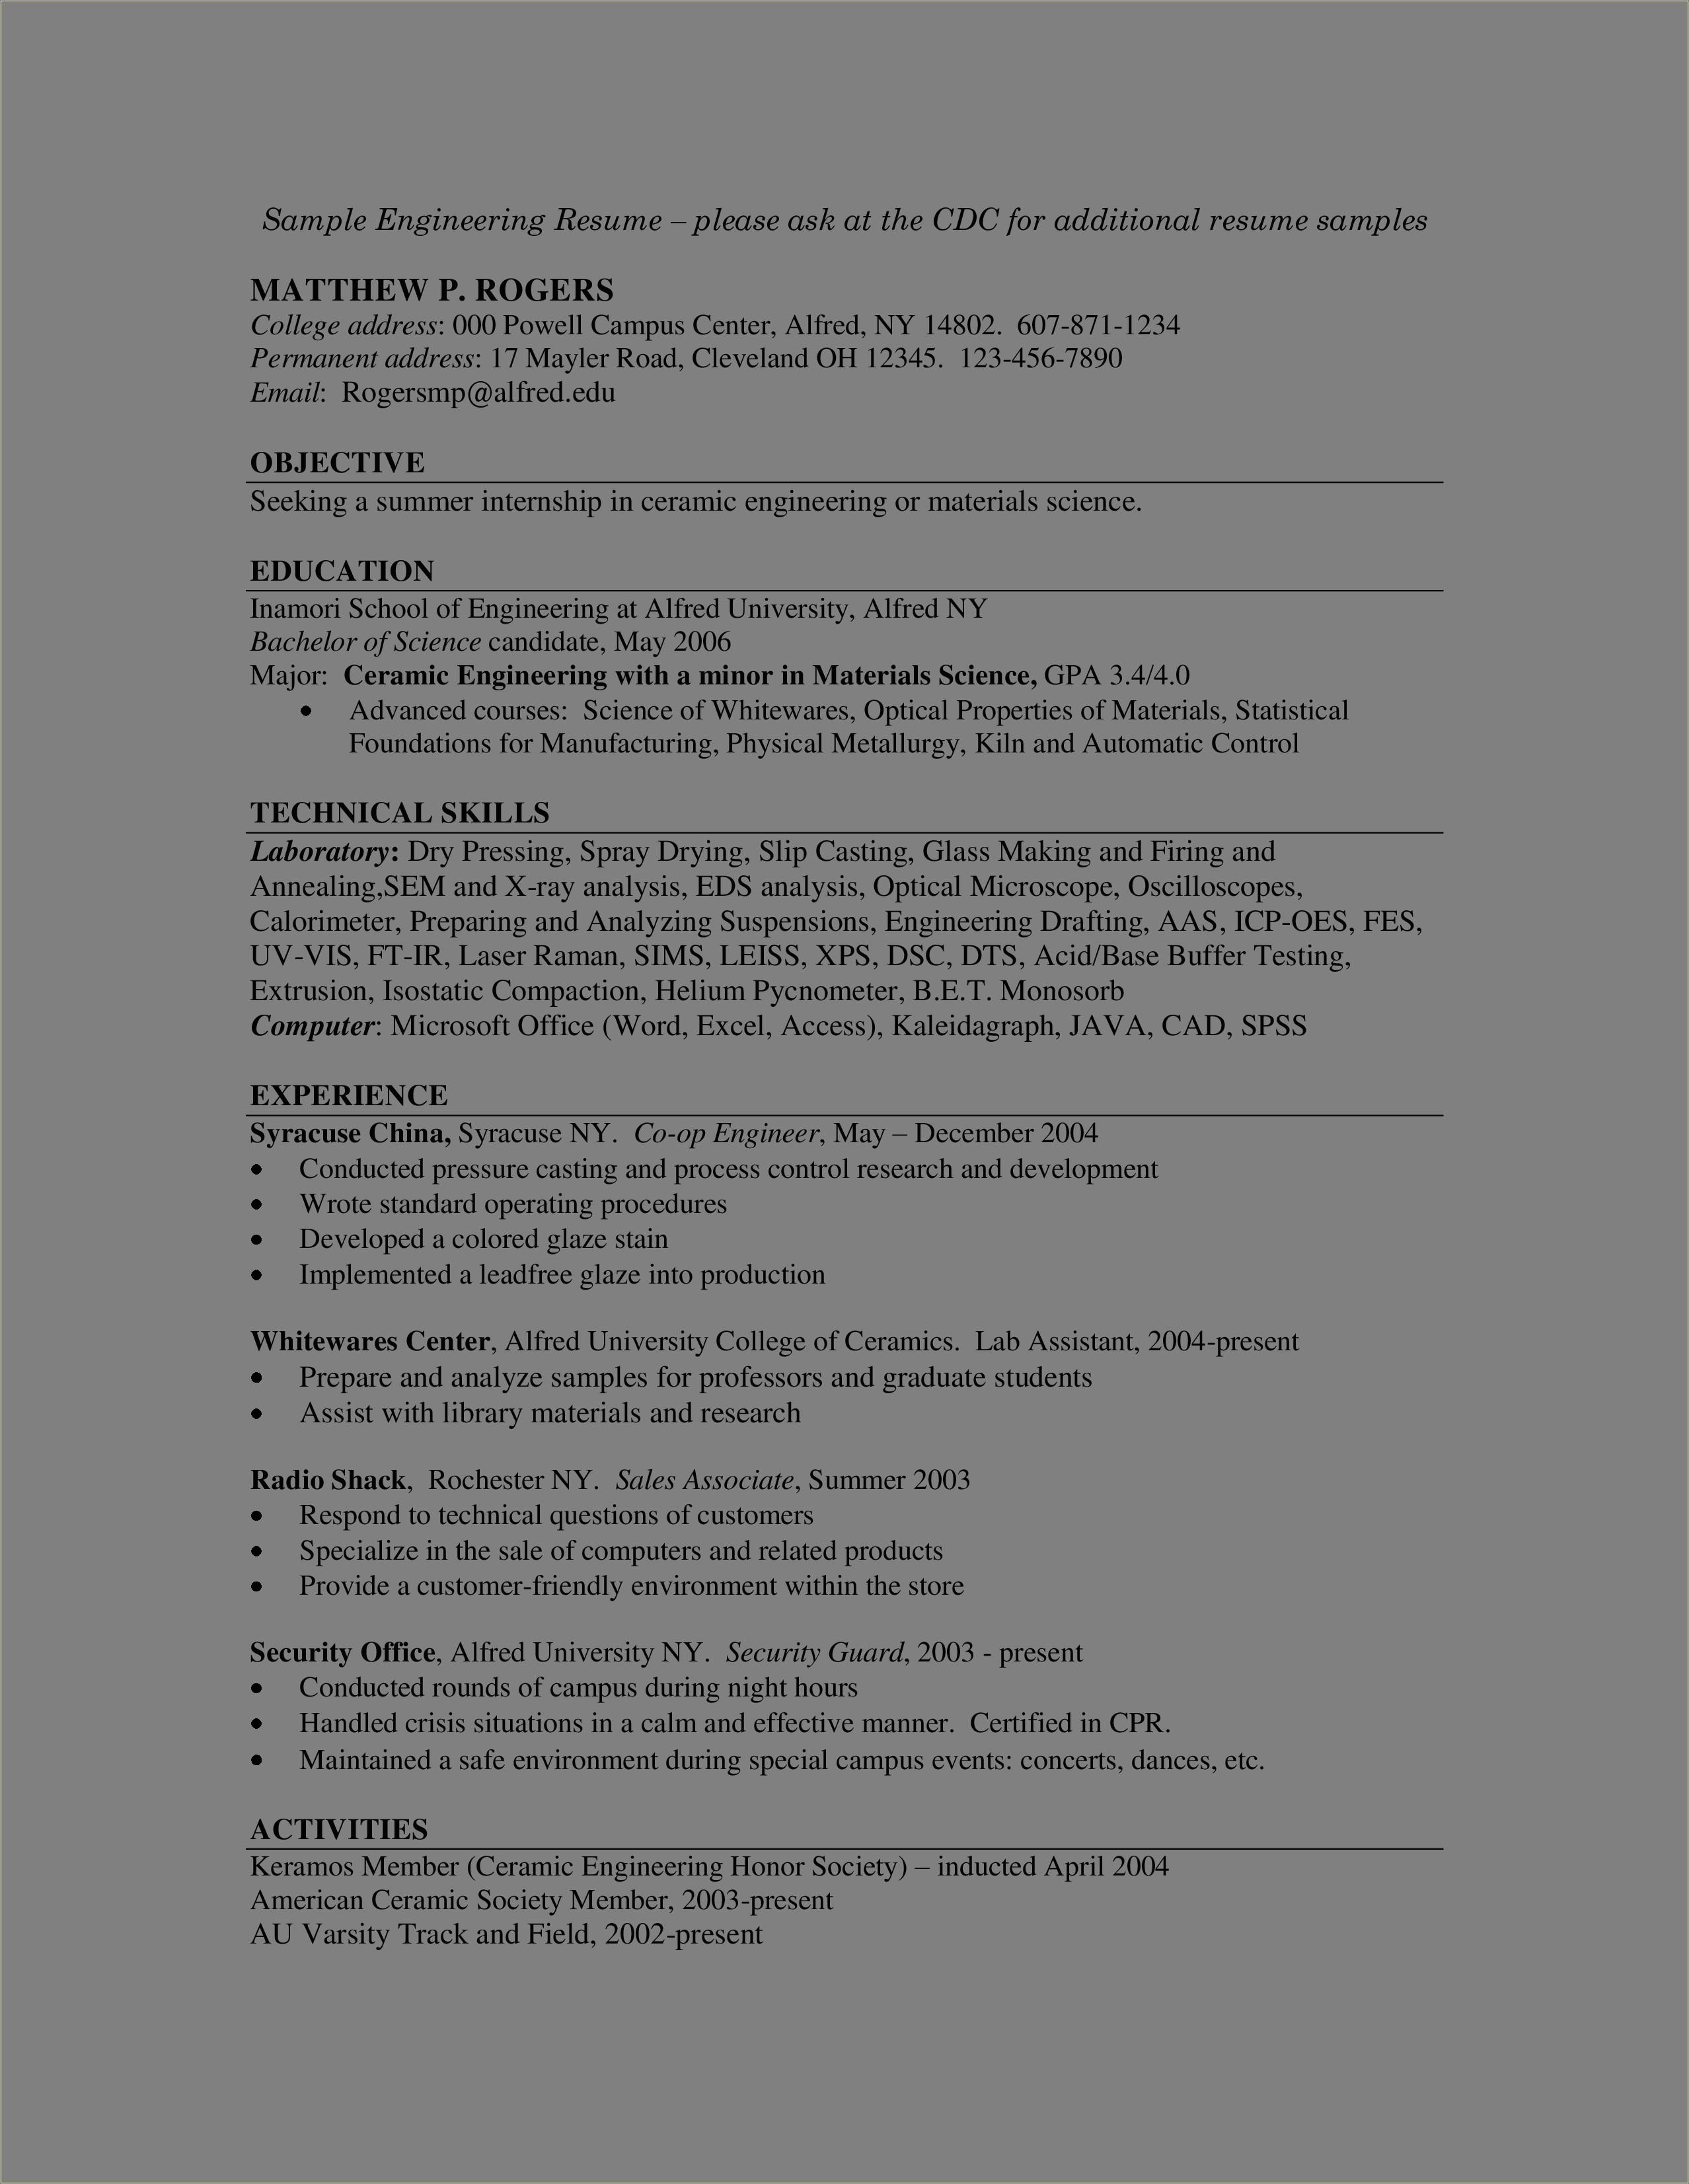 Resume Example Computer Lab Assistant